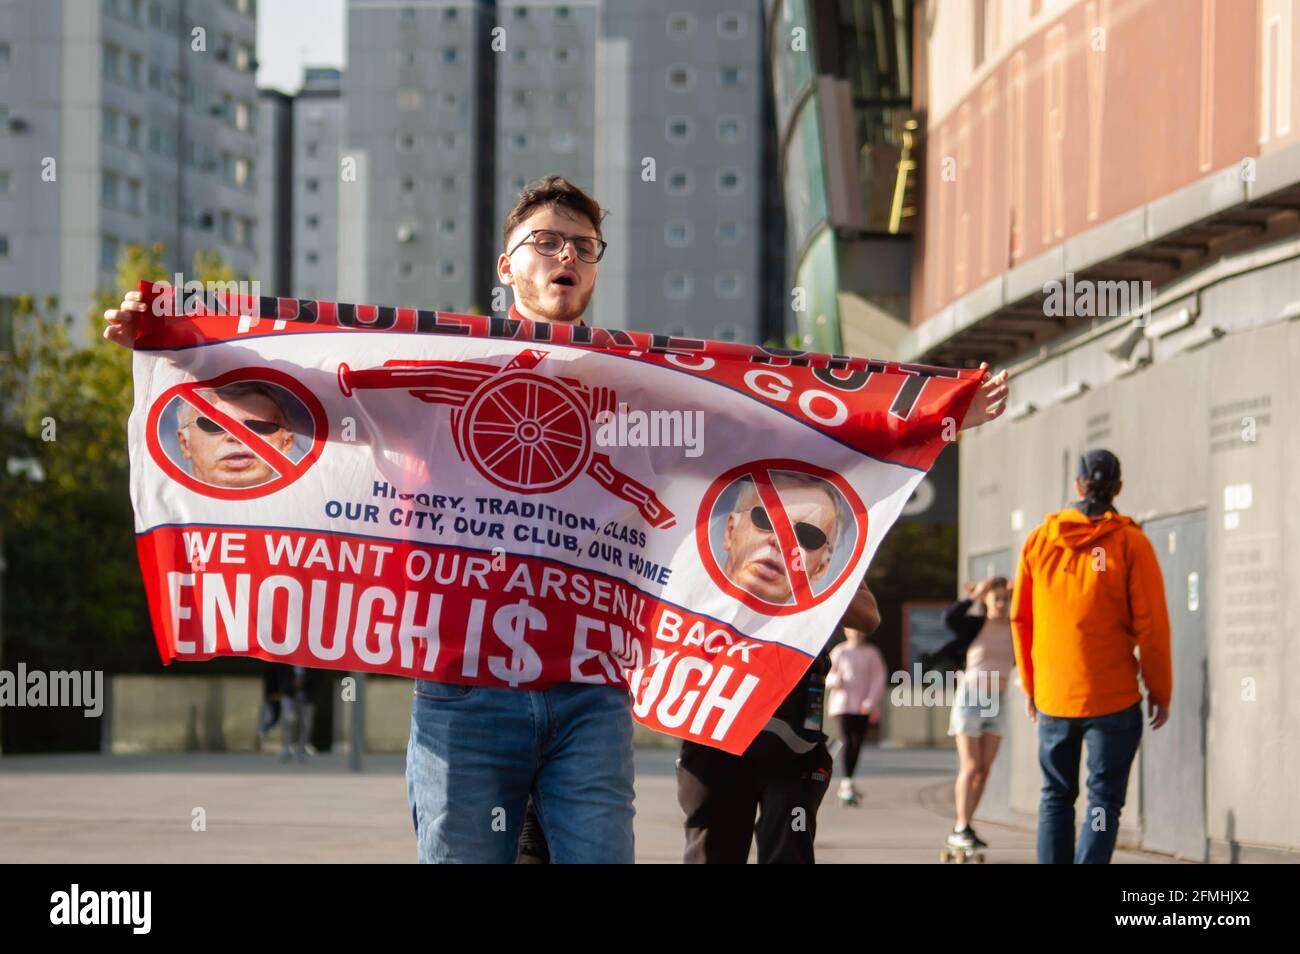 London, England. 9th May 2021. Arsenal fans protesting against Stan Kroenke, outside Emirates stadium Credit: Jessica Girvan/Alamy Live News Stock Photo